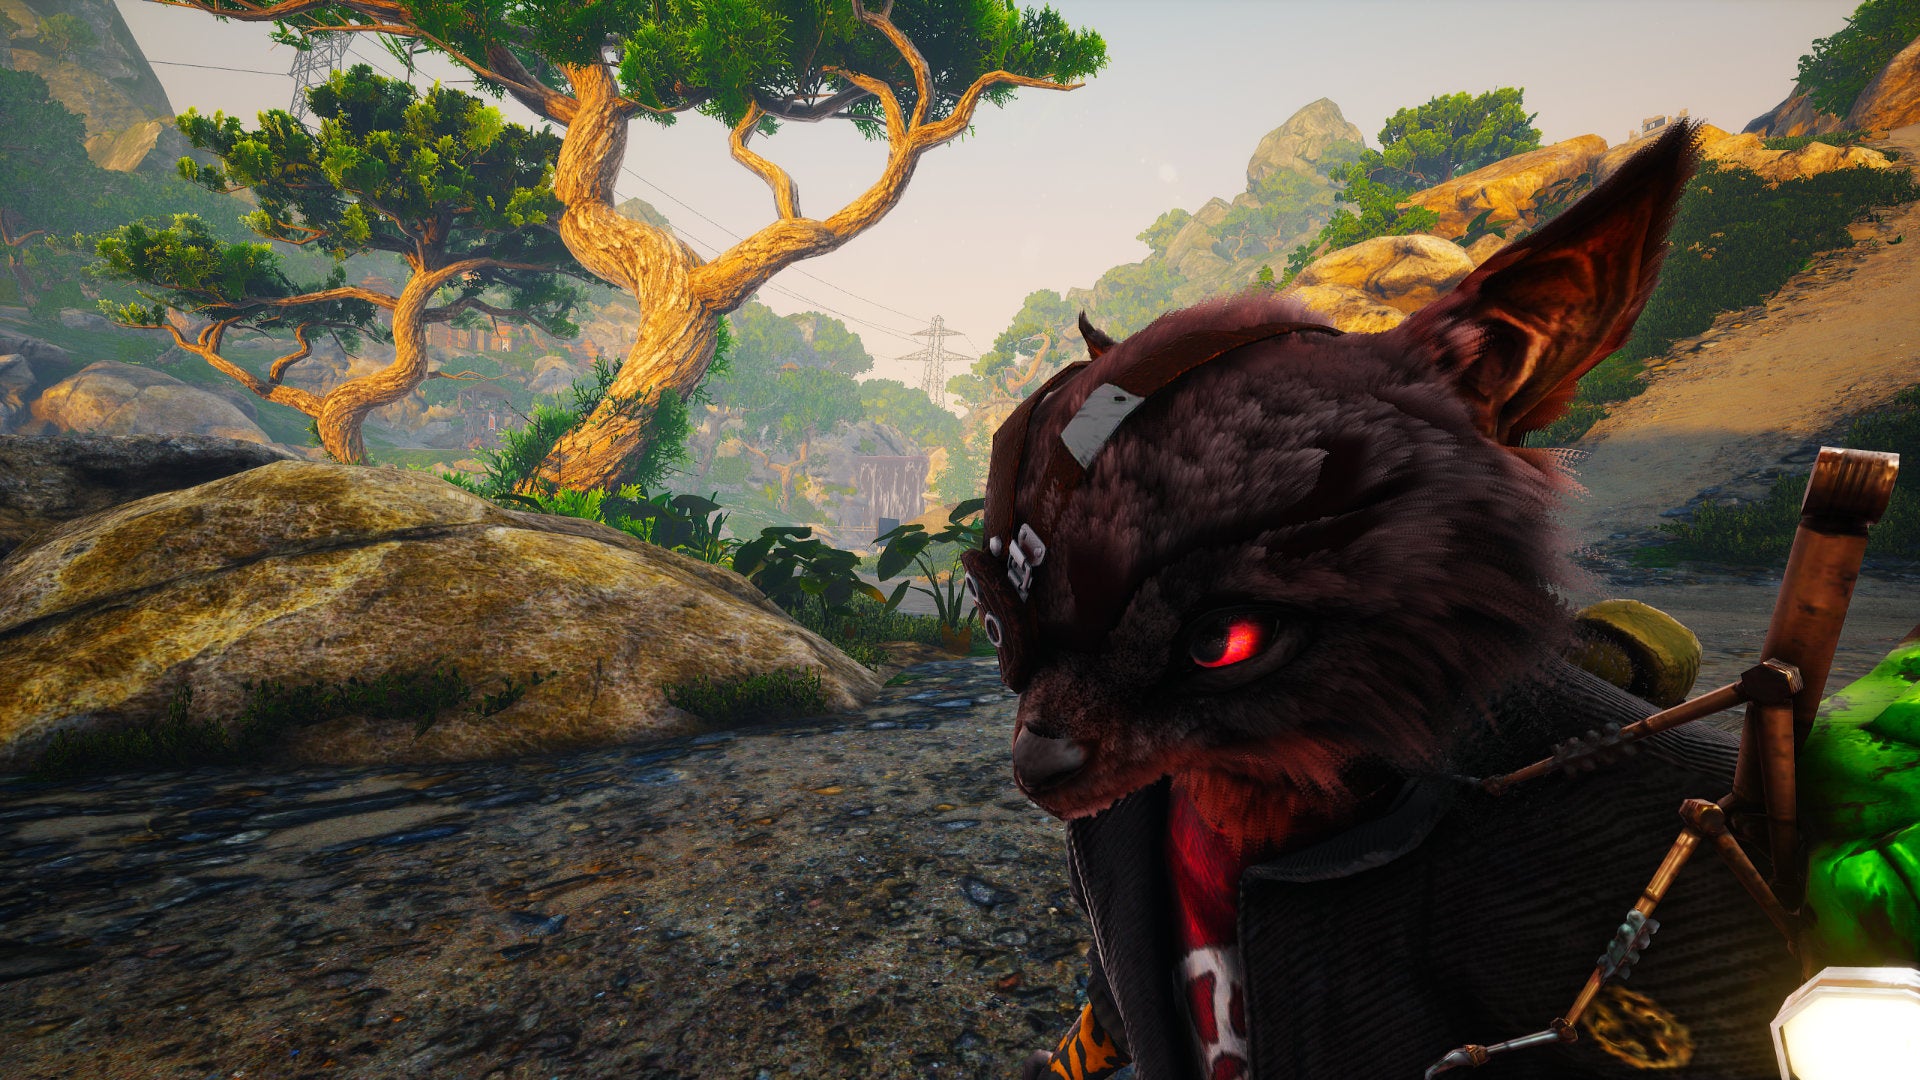 A screenshot taken using Biomutant's in-game Photo Mode of the character's face, with trees in the background.